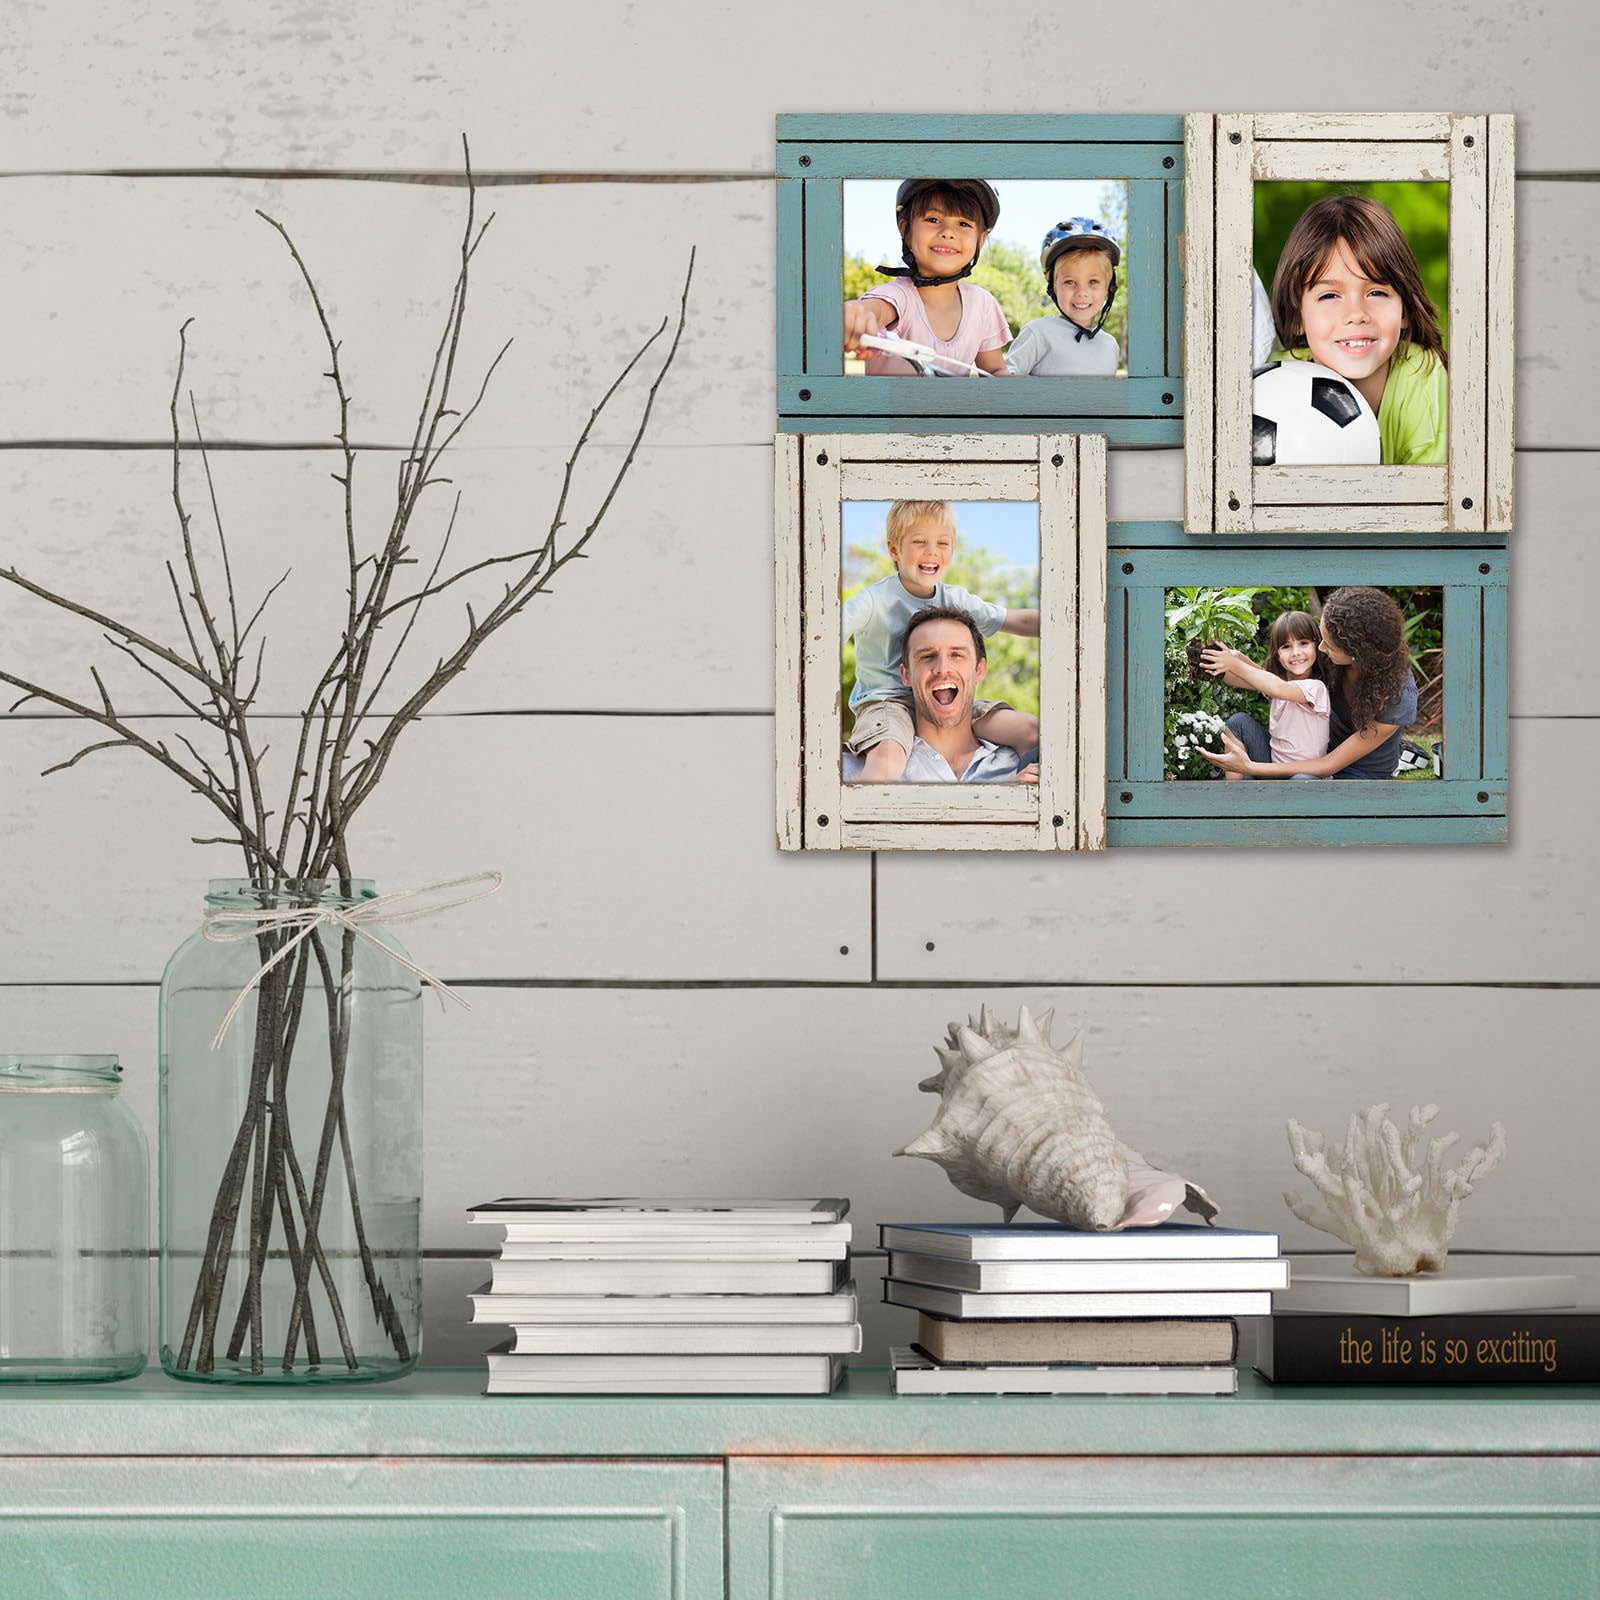 Excello Global Products Vintage Farmhouse Window Photo Frame Holds Four 4x6 or 5x7 Photos